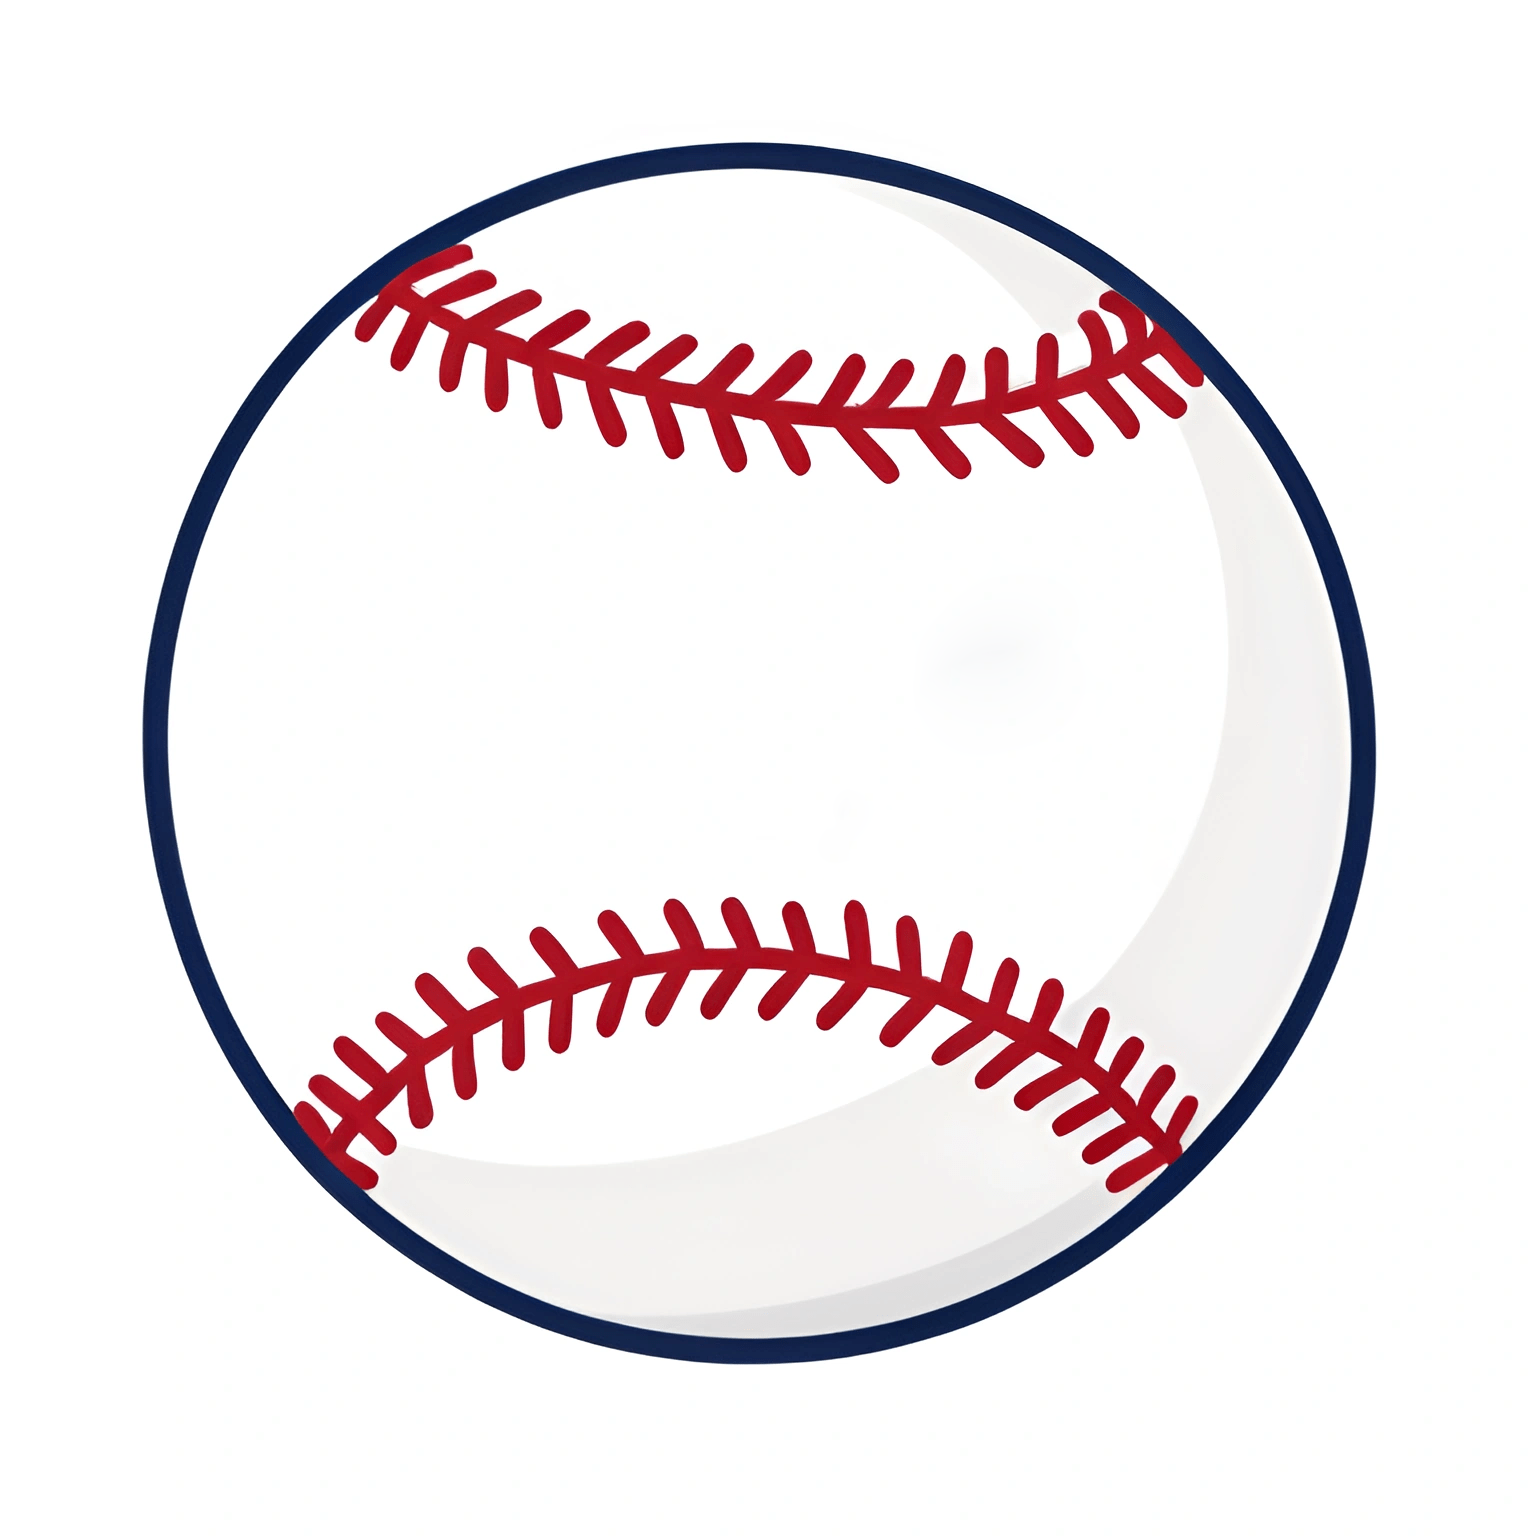 a close up of a baseball ball with red stitches on a white background